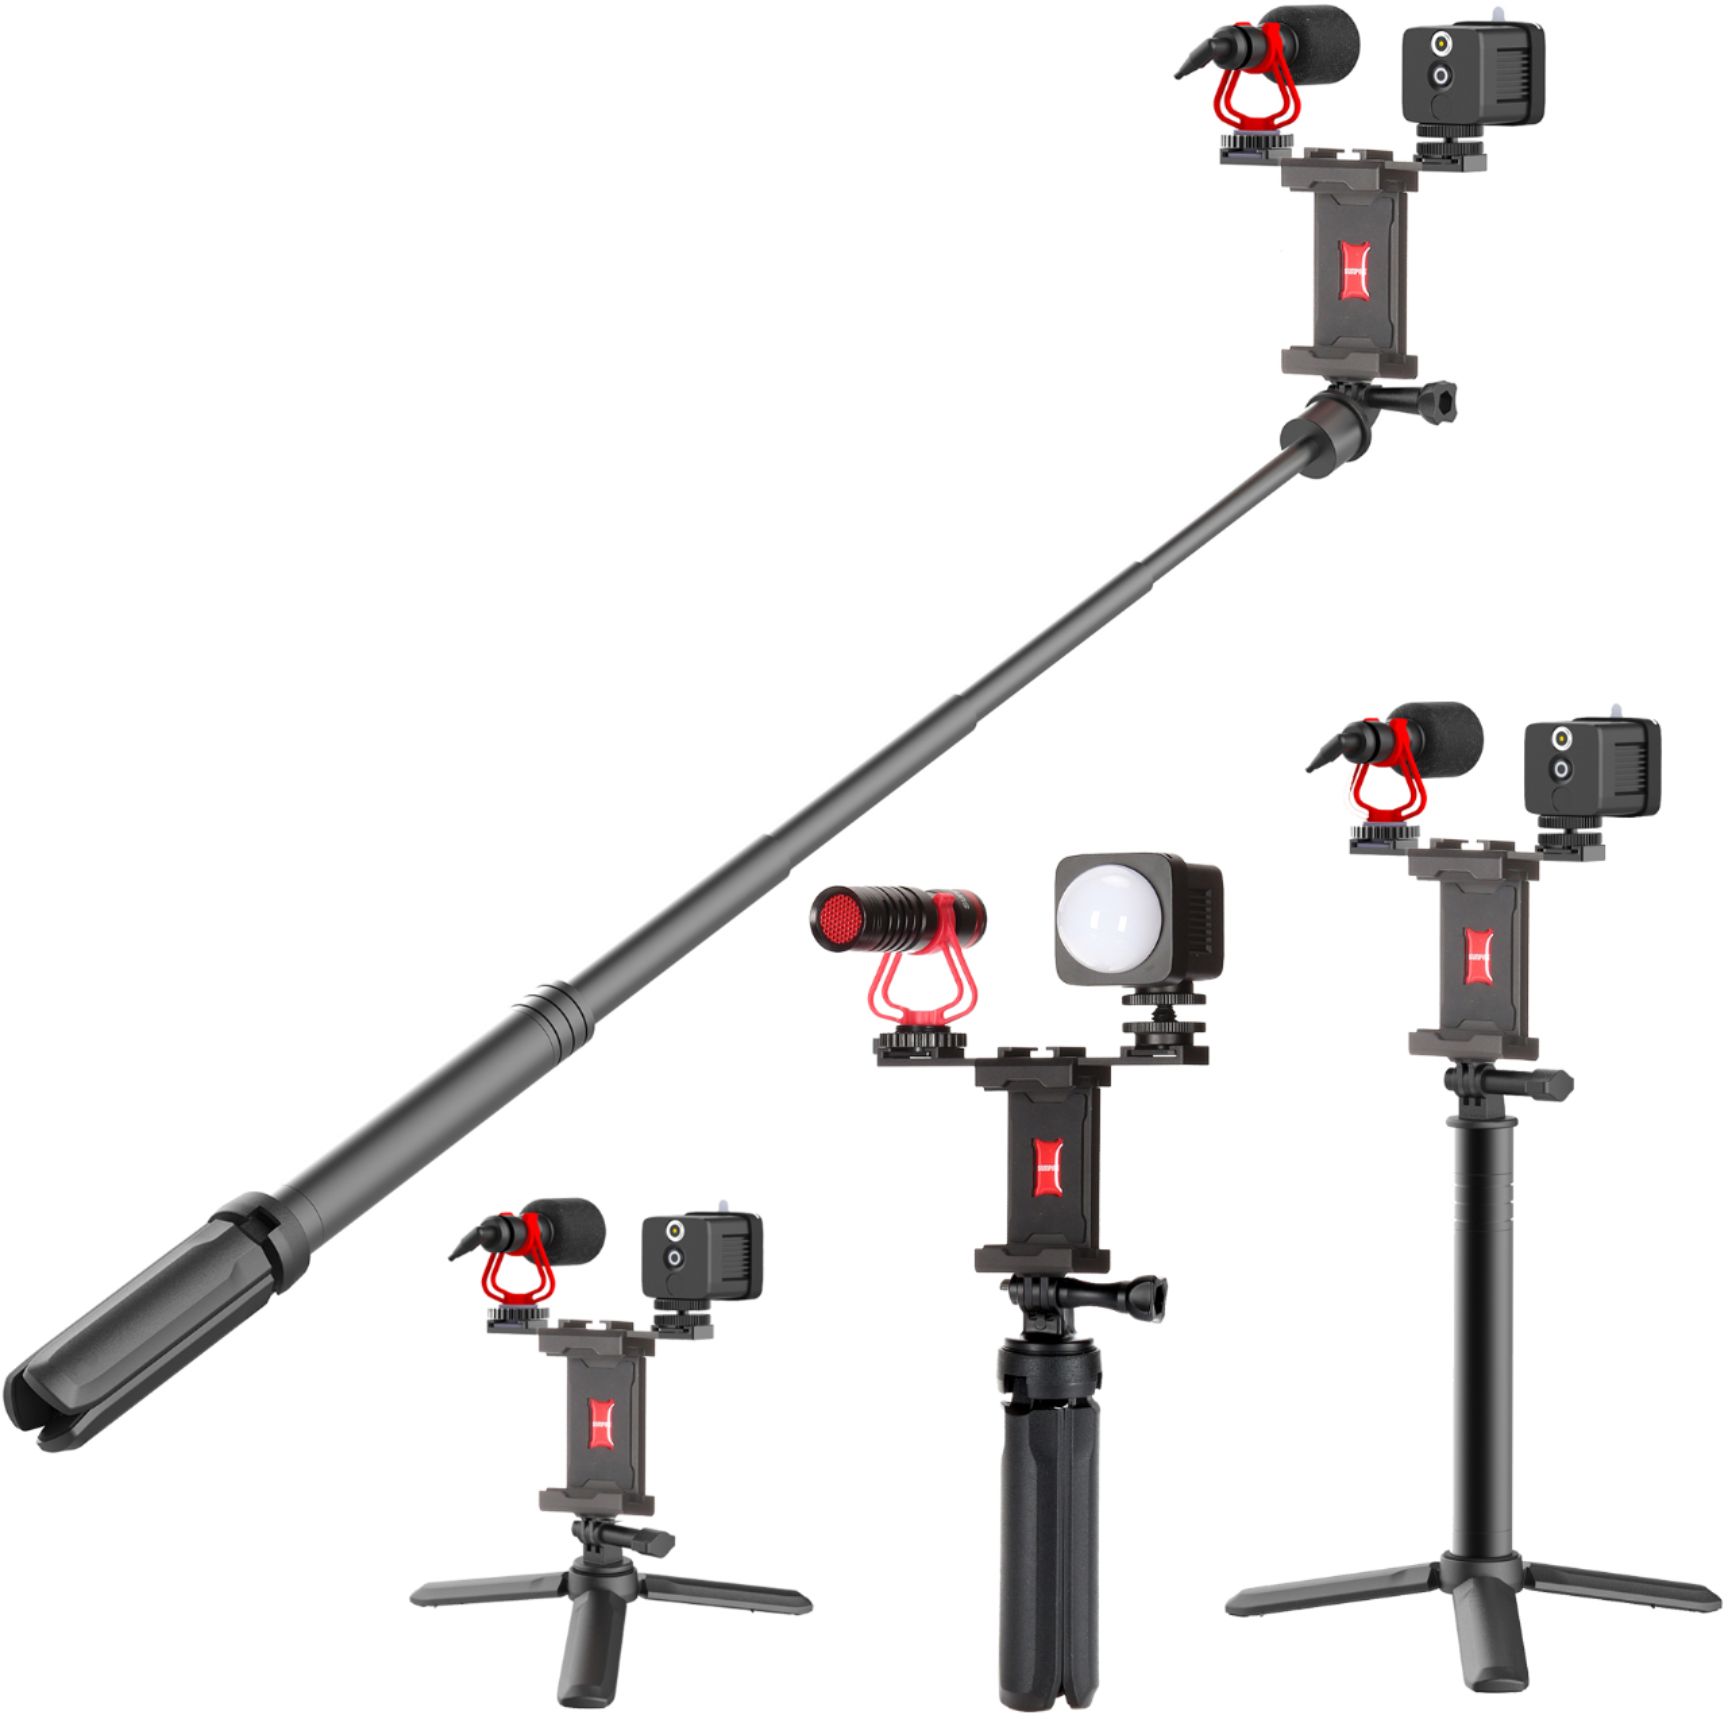 Smartphone Microphone Light Kit Portable Mobile Phone Tripod Fill Light  Microphone Set For Live Broadcast